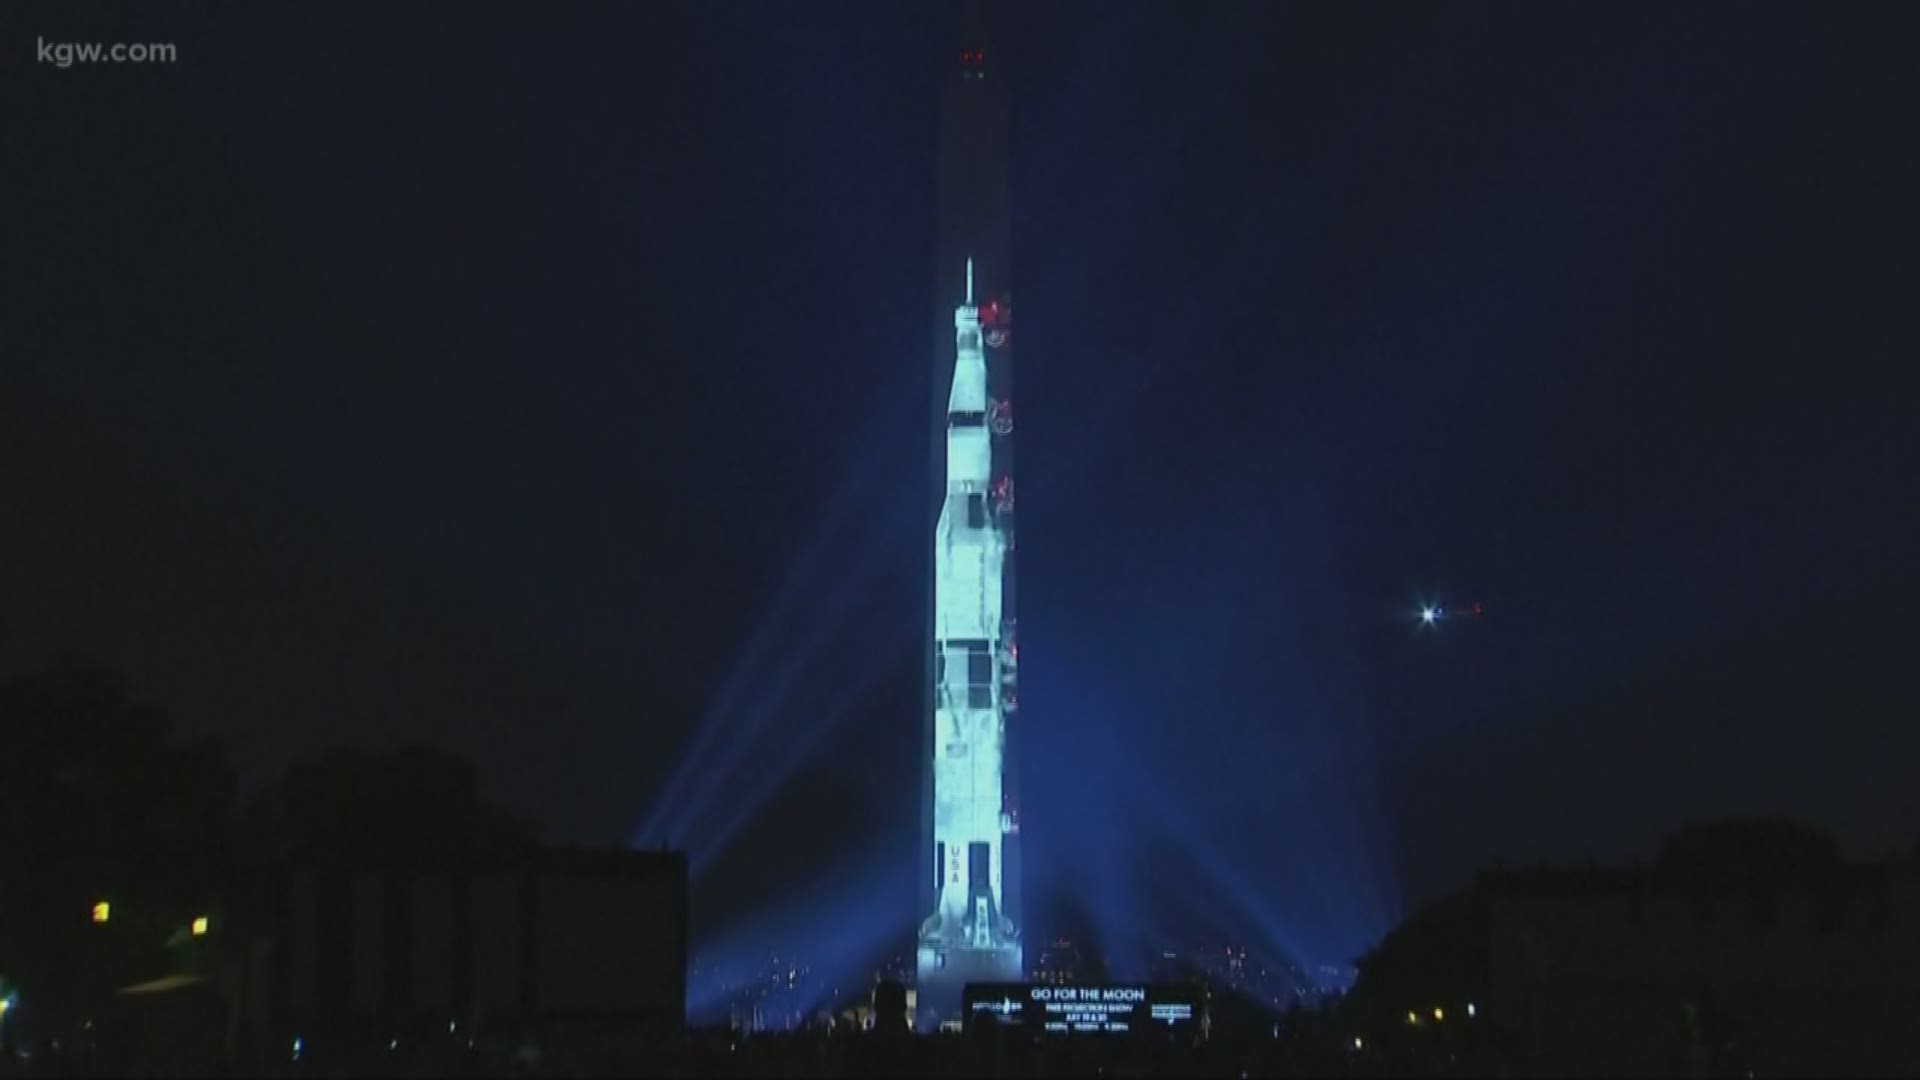 The Washington Monument in D.C. is turned into the Apollo 11 Saturn V rocket